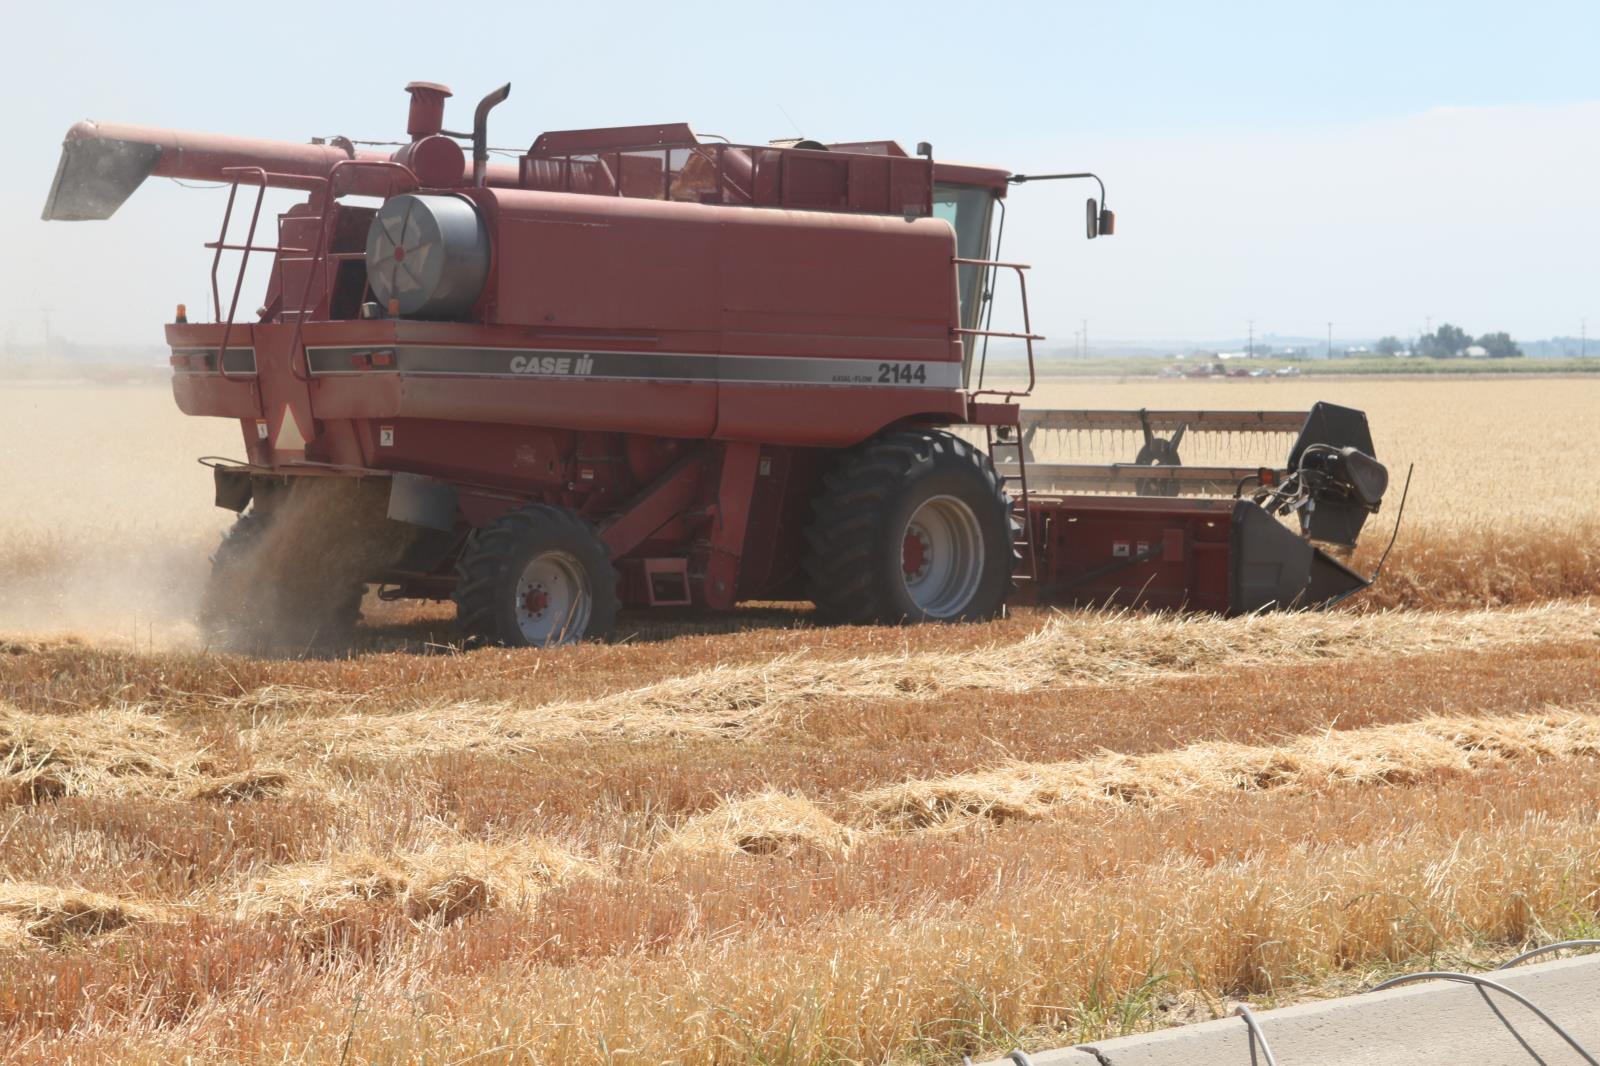 Wheat is harvested in a southwestern Idaho field in this Idaho Farm Bureau file photo. According to USDA, the total value of Idaho ag exports in 2019 was $2.26 billion, up 9 percent over 2018. Idaho wheat exports were up 18 percent last year while dairy exports rose 13 percent.